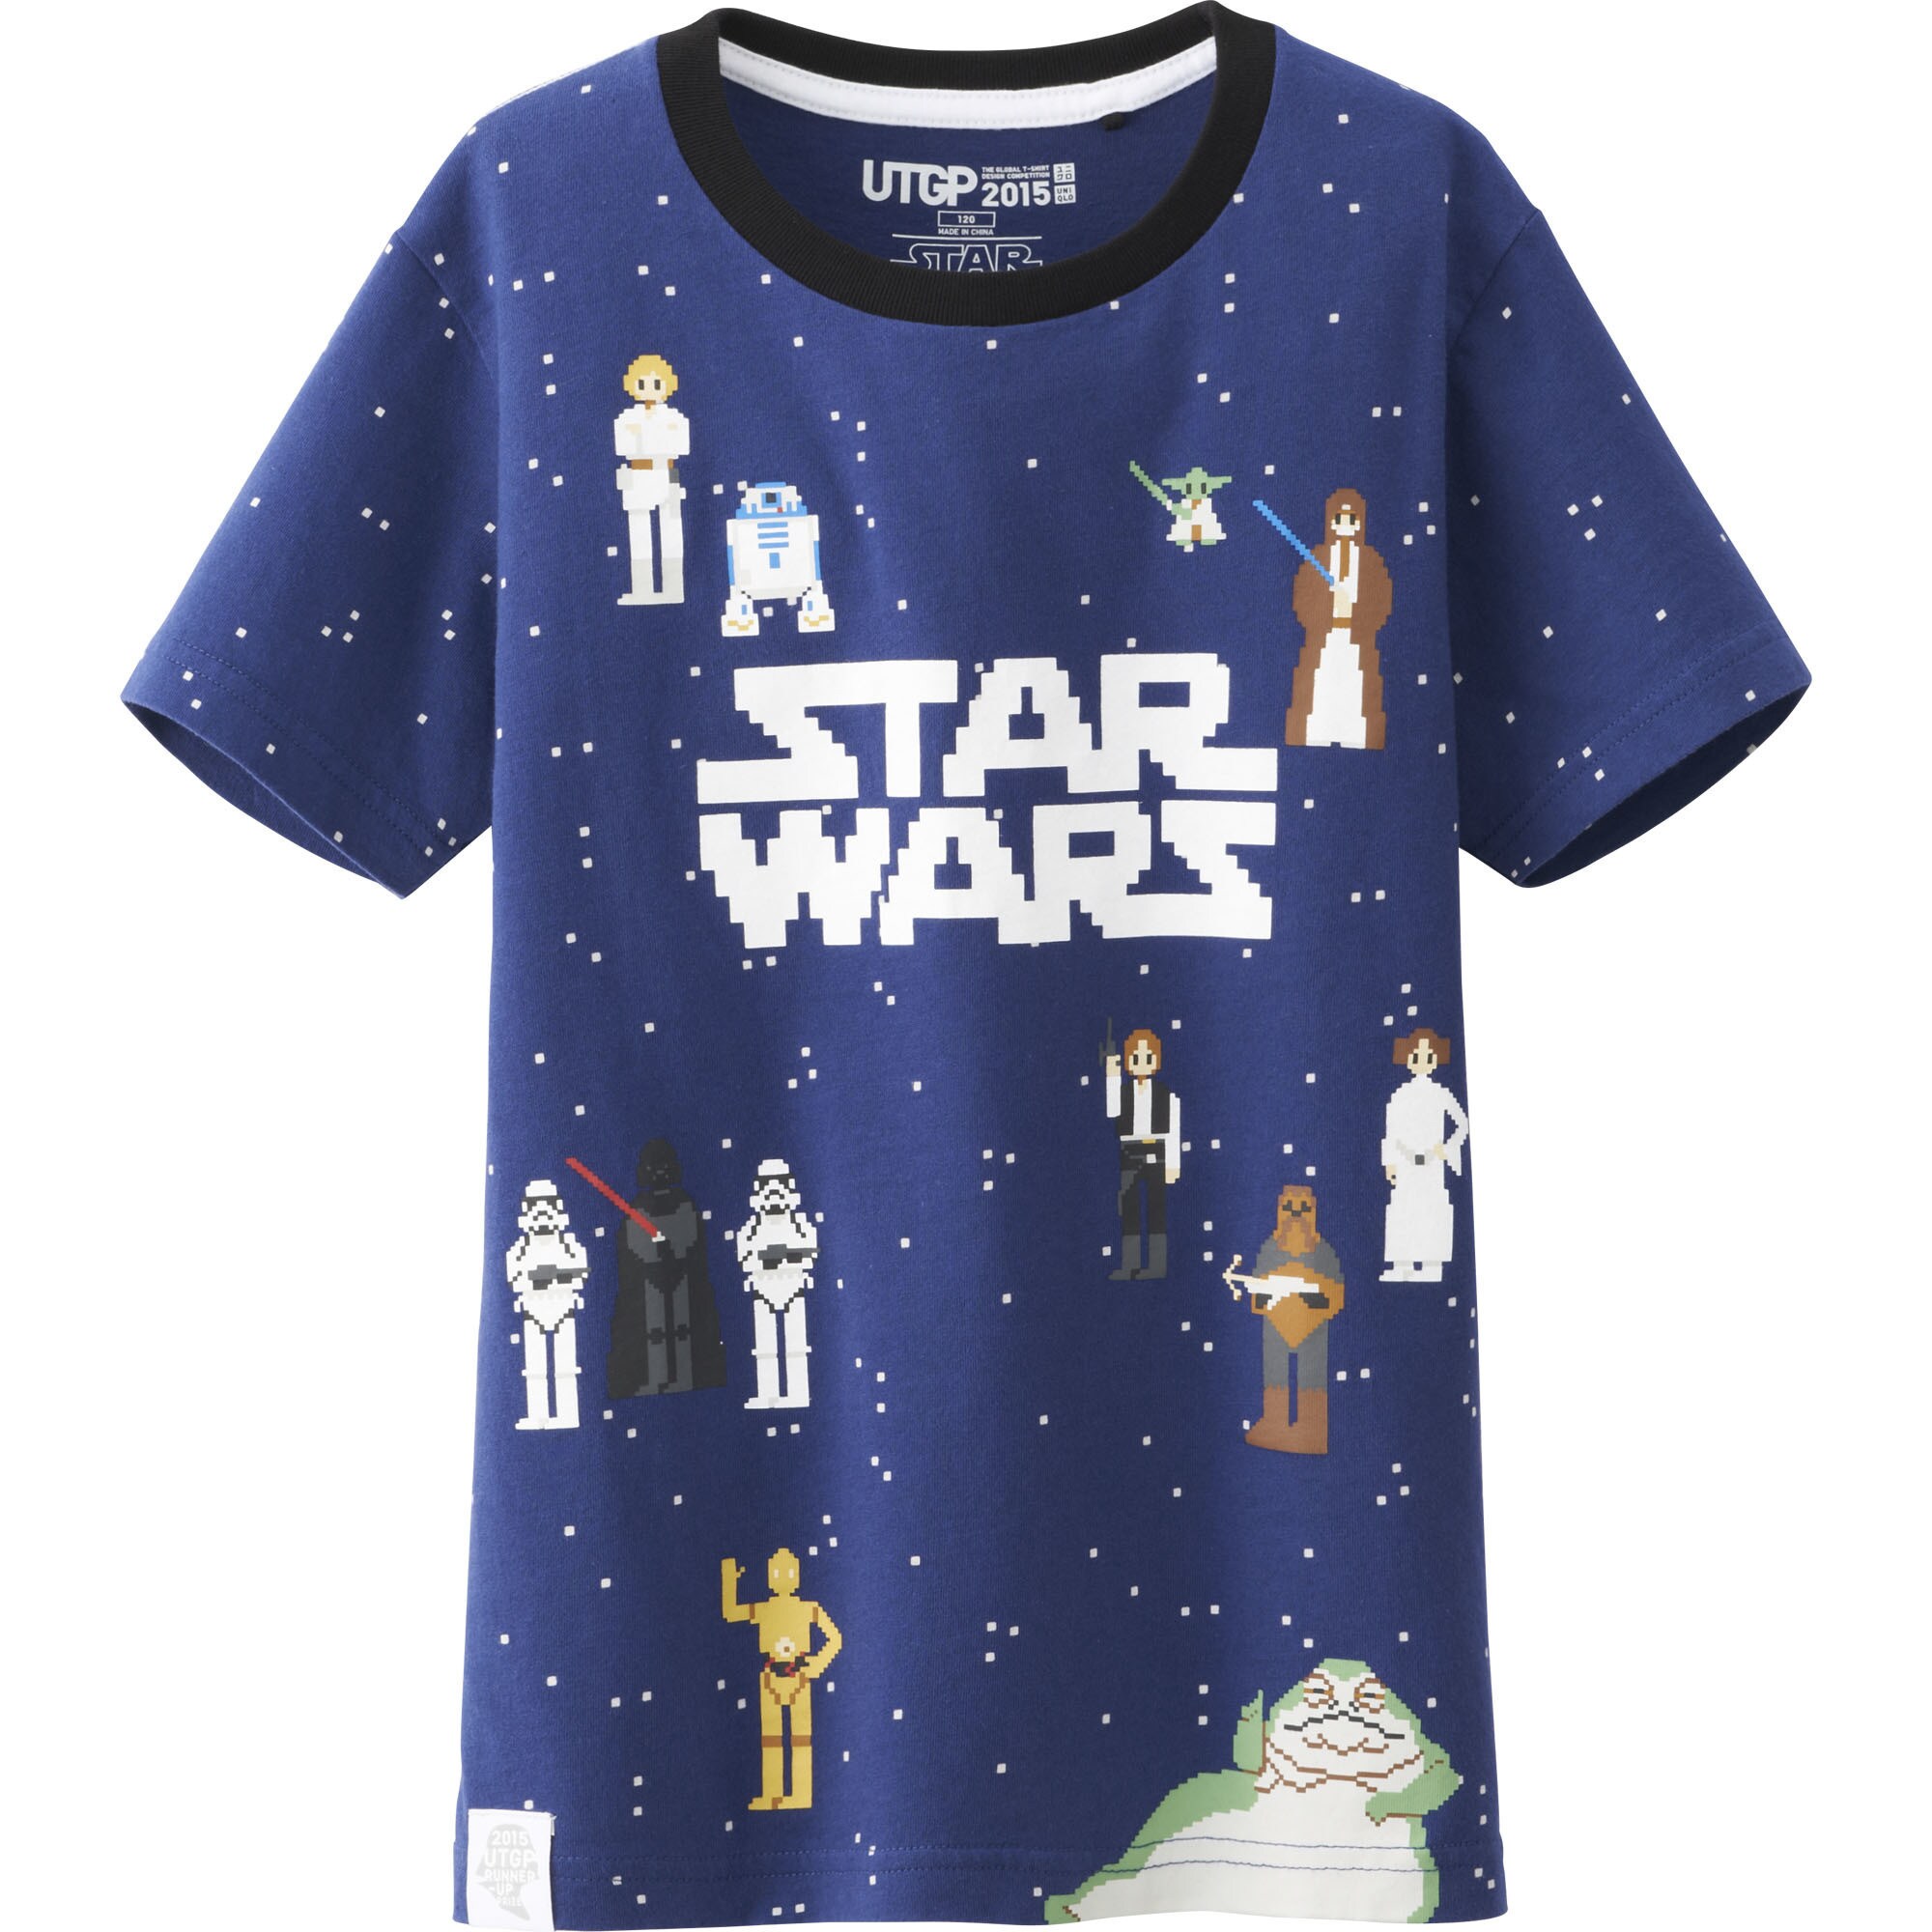 UNIQLO's New Star Wars T-Shirts - Preview!